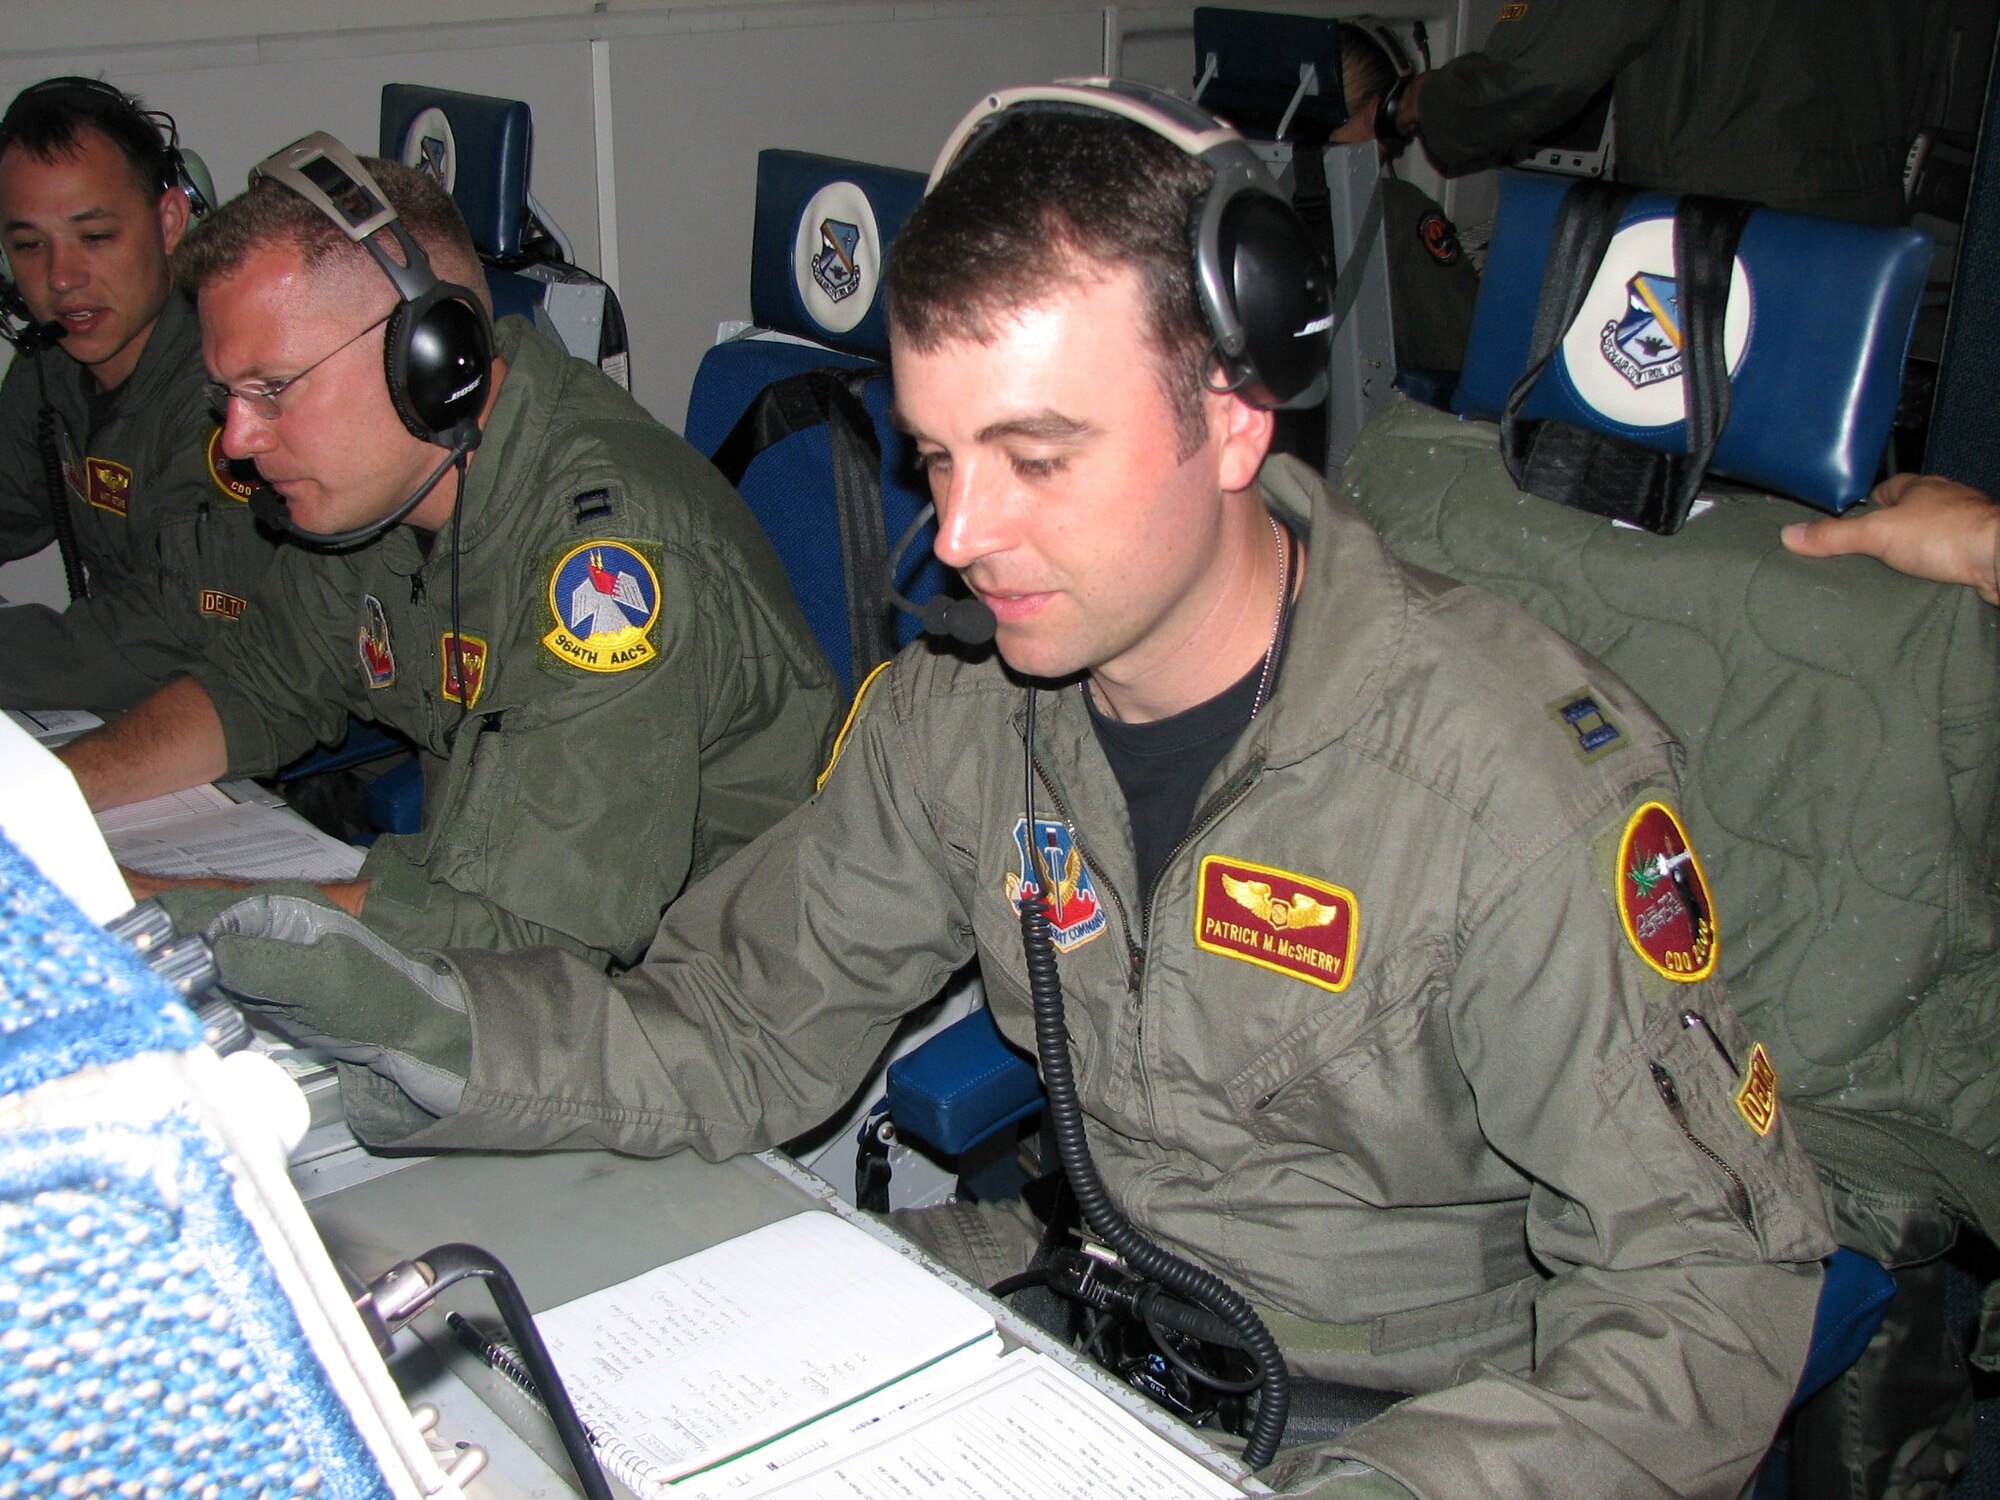 From left, Captains Matt Ketchie, Tim Higgins and Patrick McSherry work during an E-3 Sentry mission Dec. 21 over Ecuador. The three are deployed to Manta Forward Operating Location, Ecuador, from Tinker Air Force Base, Okla. Captain Ketchie and McSherry are air weapons officers, and Captain Higgins is a senior director. The Airmen coordinate with agencies to provide better imagery. (U.S. Air Force photo/2nd Lt. Amber Balken)
